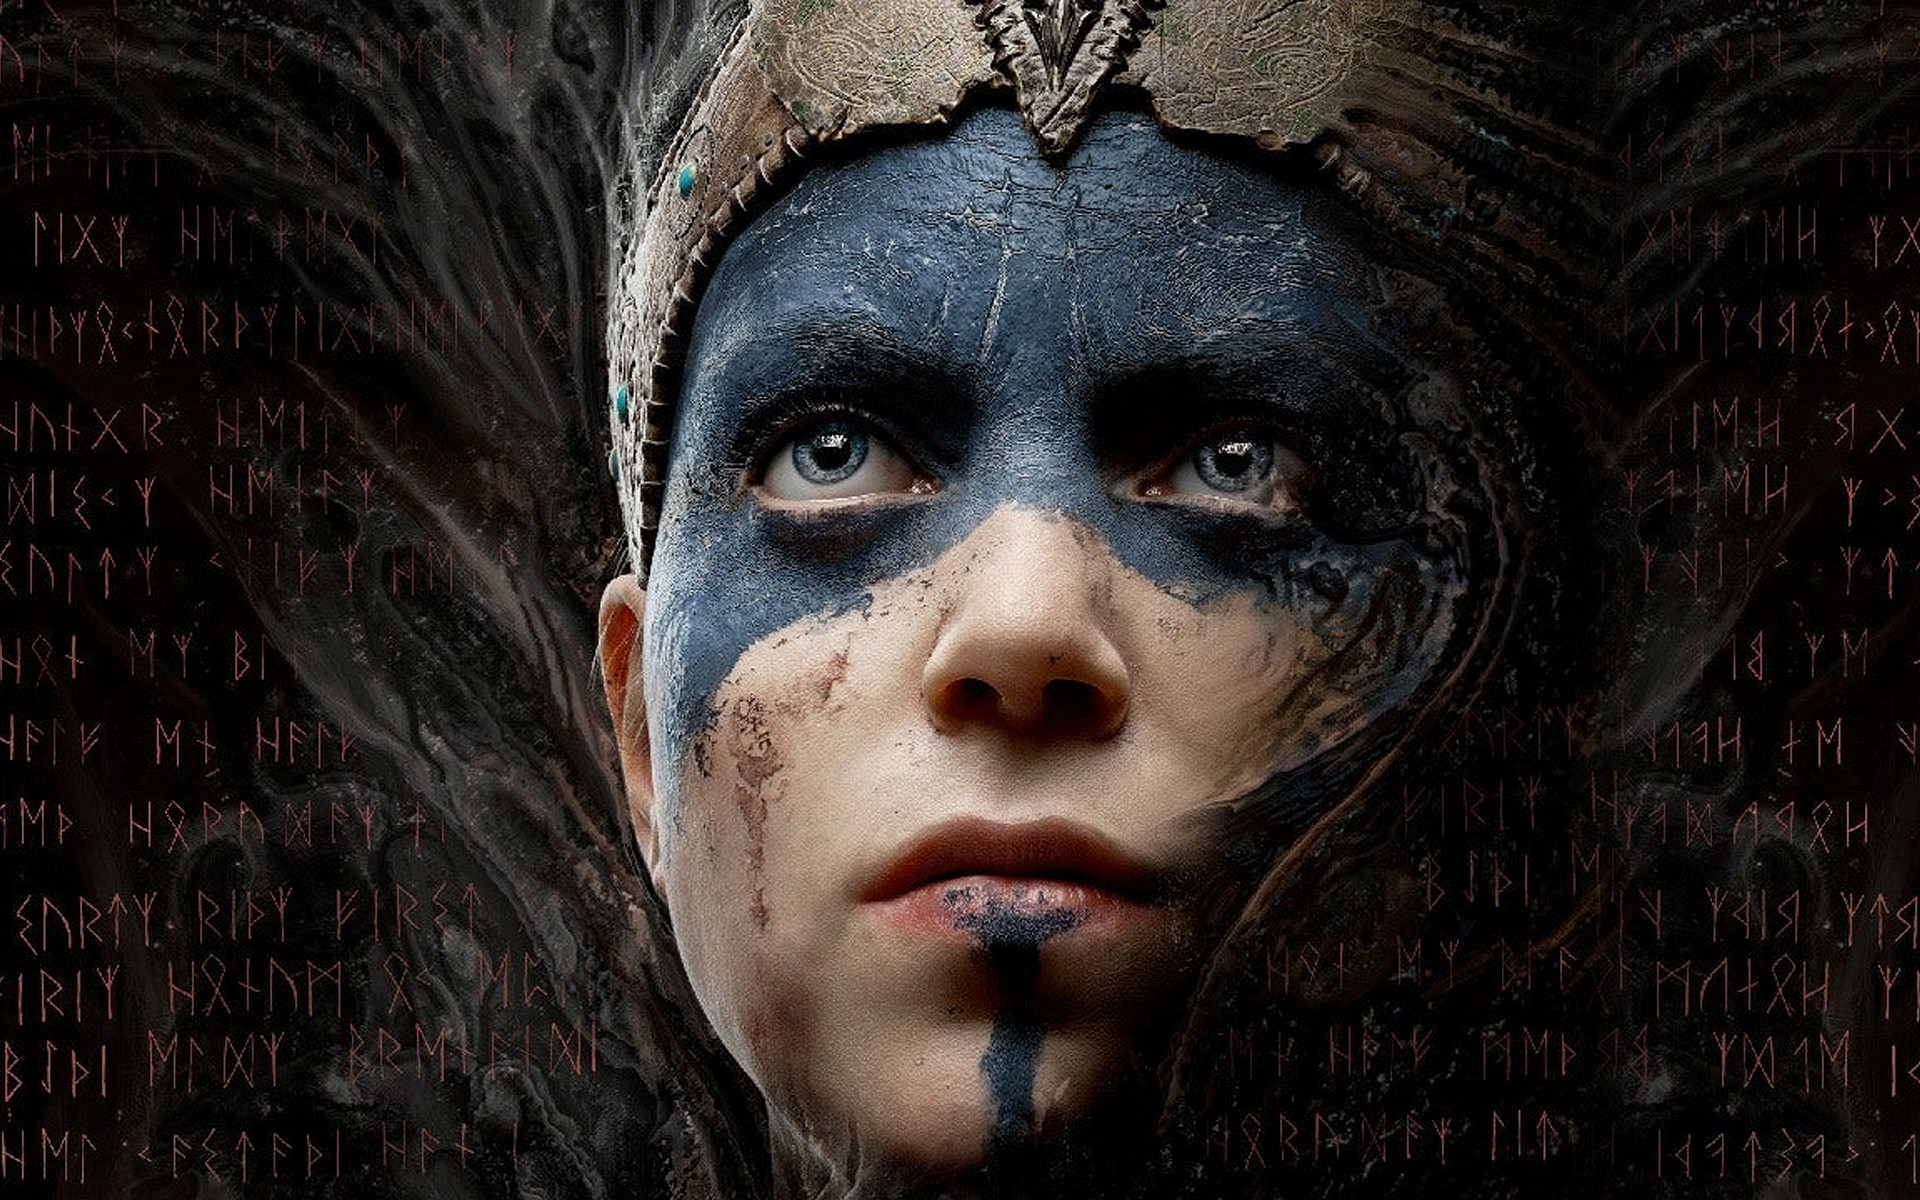 Hellblade 2 Might Have Been Teased for a 2023 Release